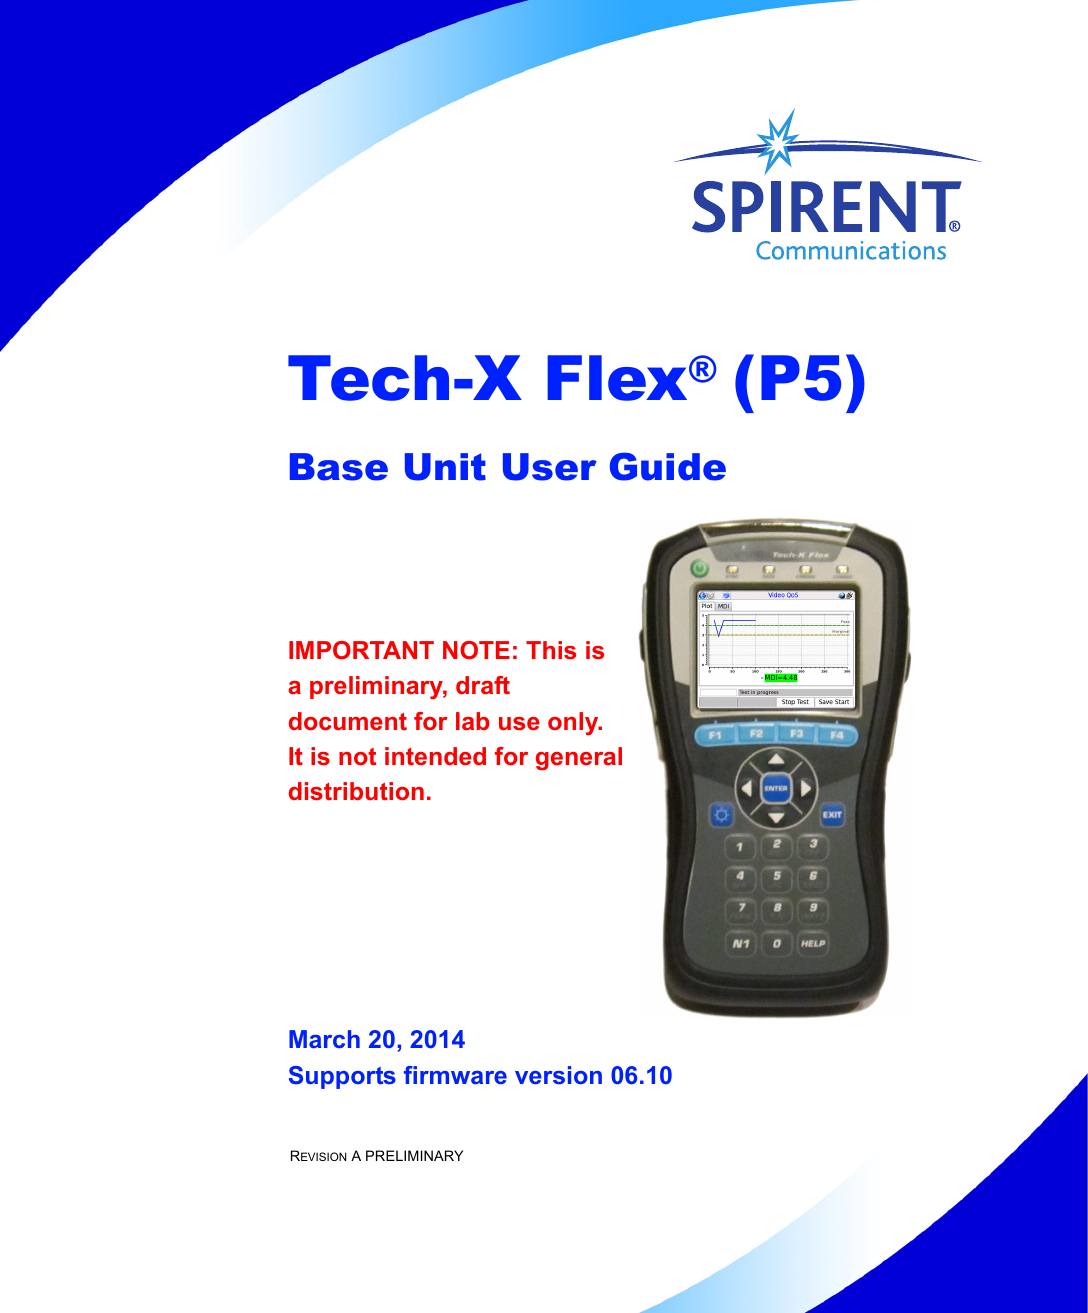 Tech-X Flex® (P5)Base Unit User GuideIMPORTANT NOTE: This is a preliminary, draftdocument for lab use only.It is not intended for generaldistribution.March 20, 2014Supports firmware version 06.10REVISION A PRELIMINARY